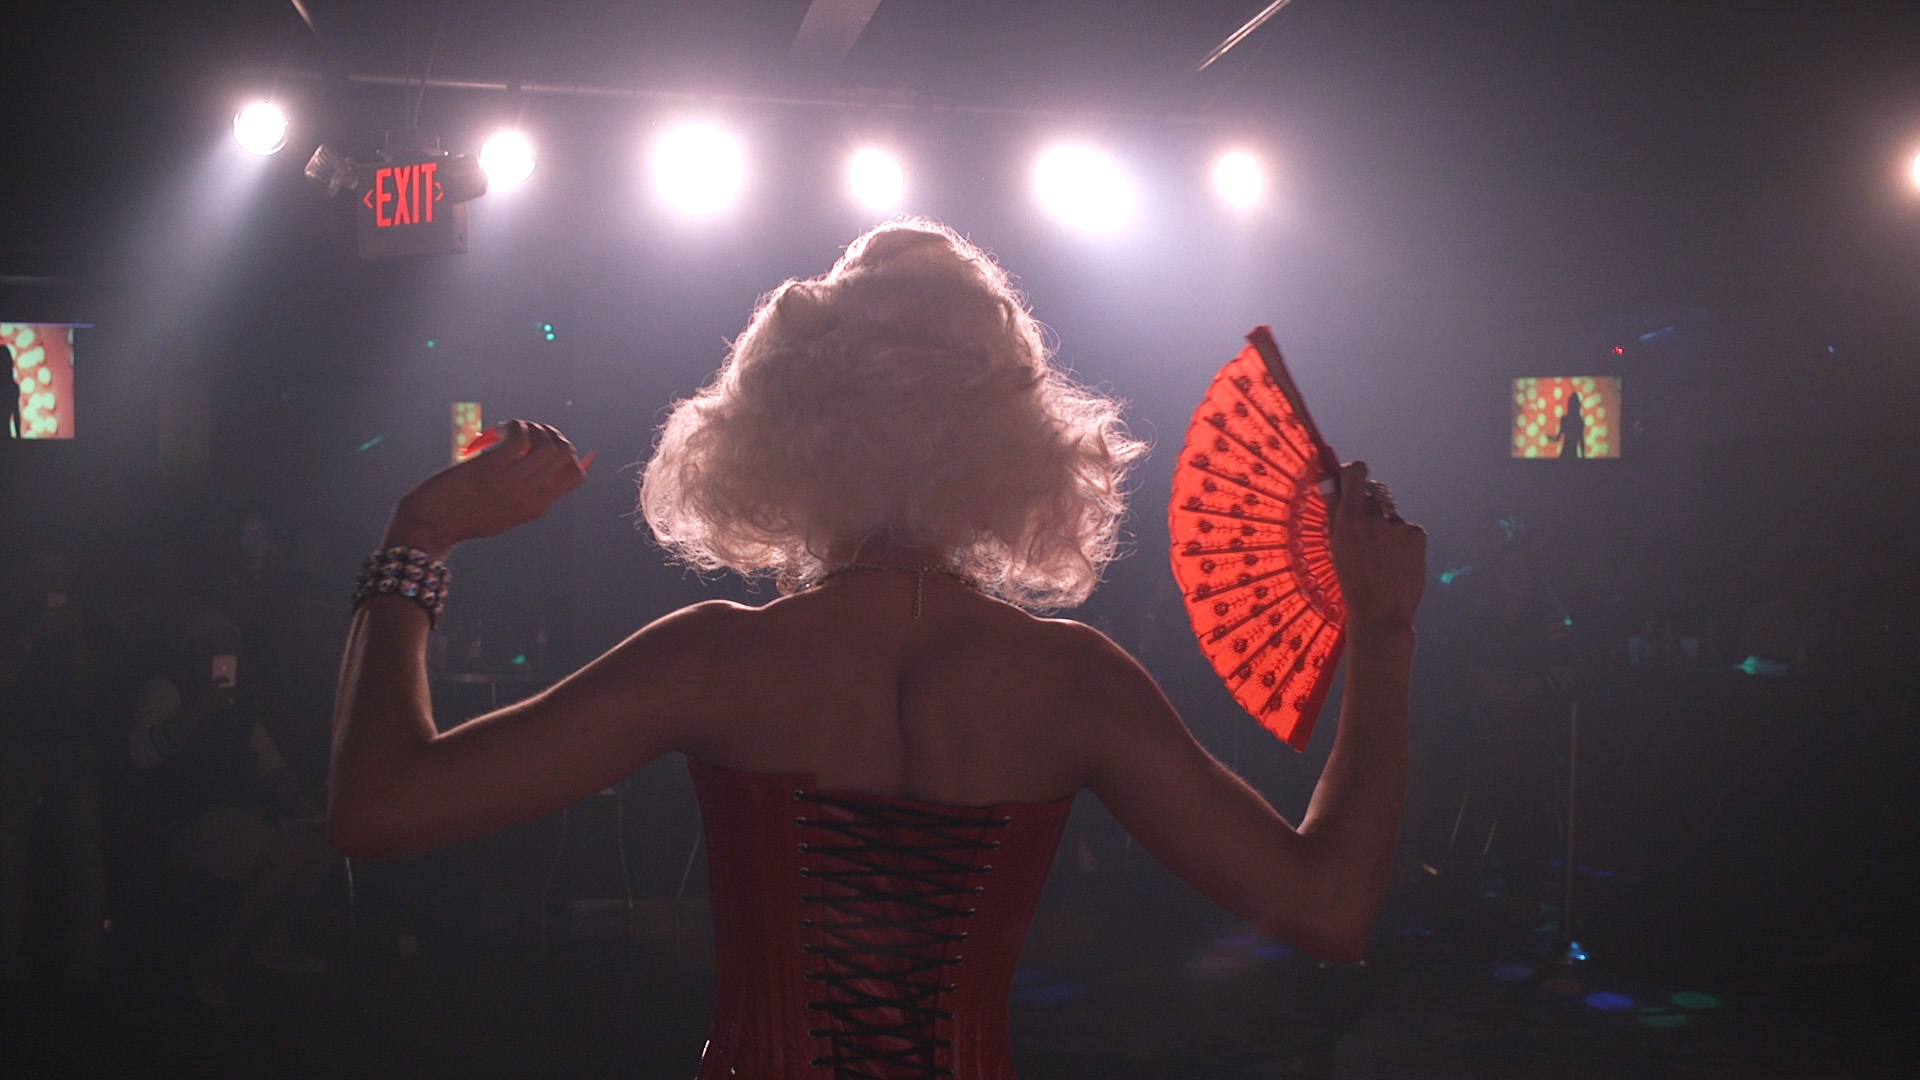 Cristina Morales performing in a blond wig, corset, and red fan, facing out into a dark bar and bright stage lights.